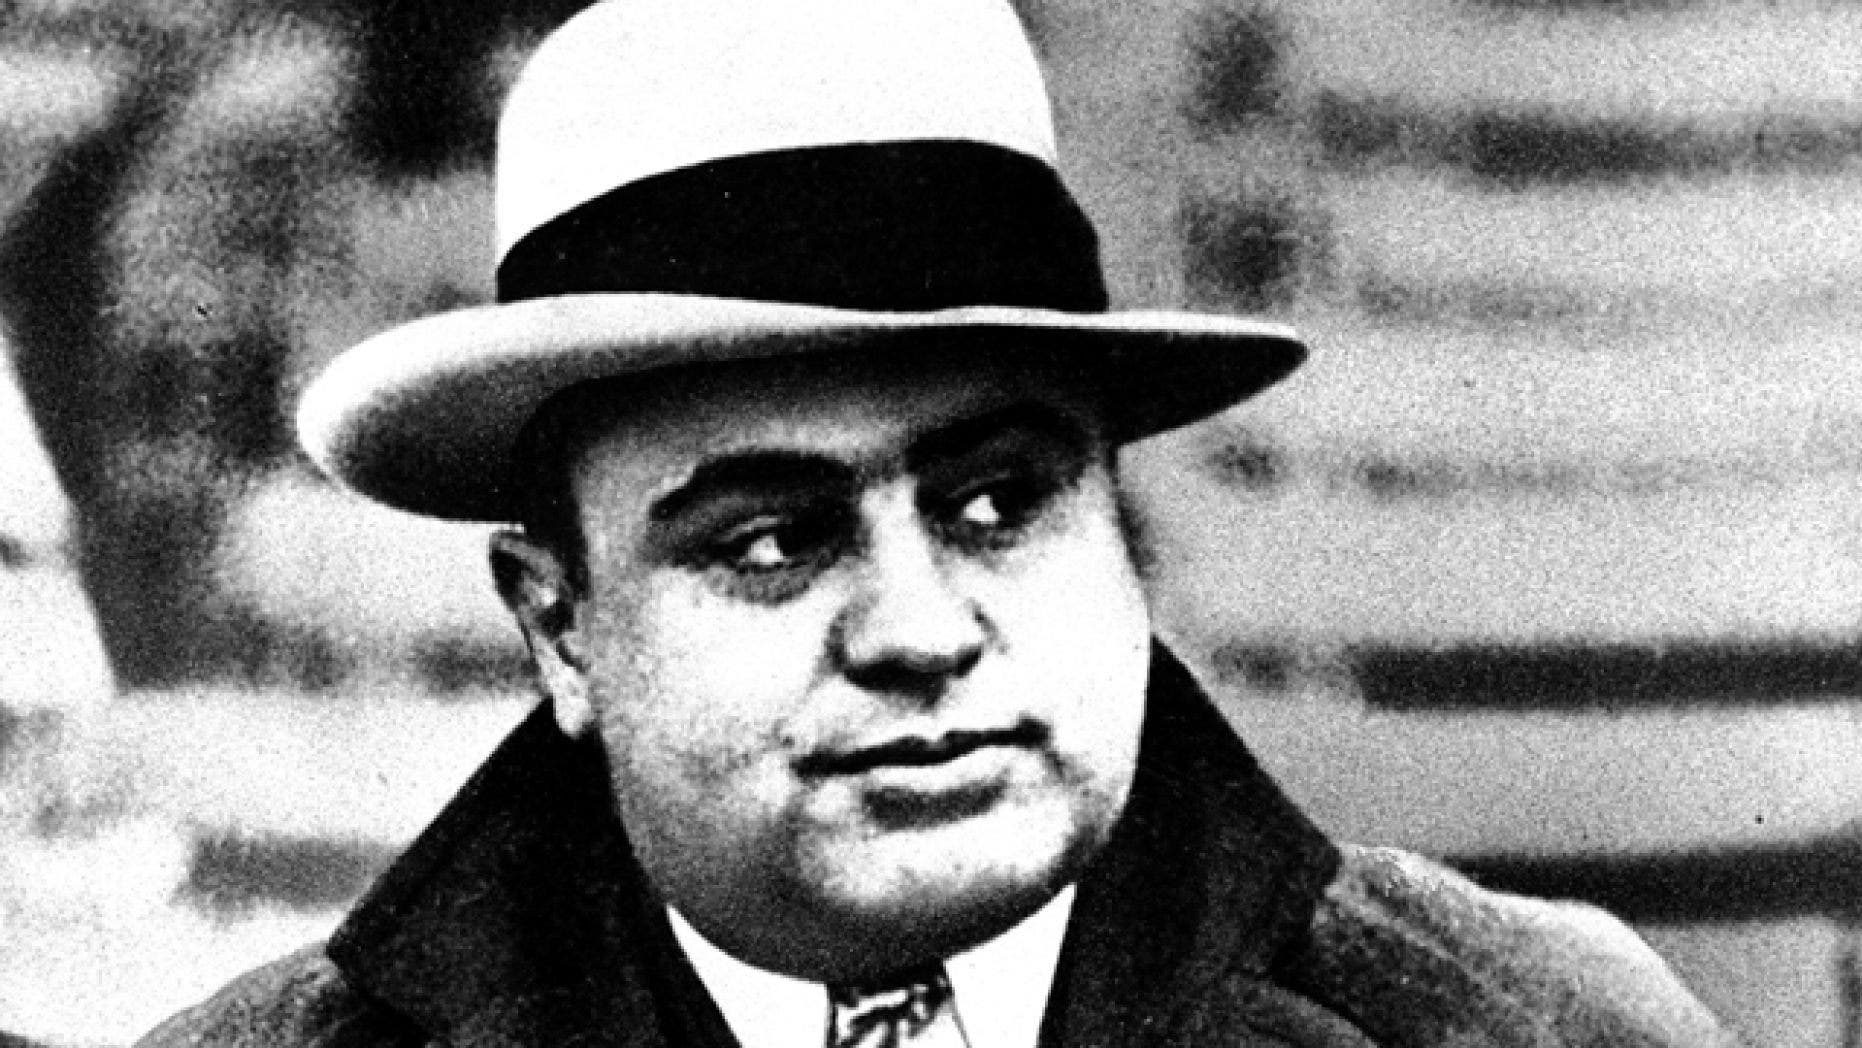 Family of Al Capone to sell notorious mobster's treasures at auction: 'A very complex person'